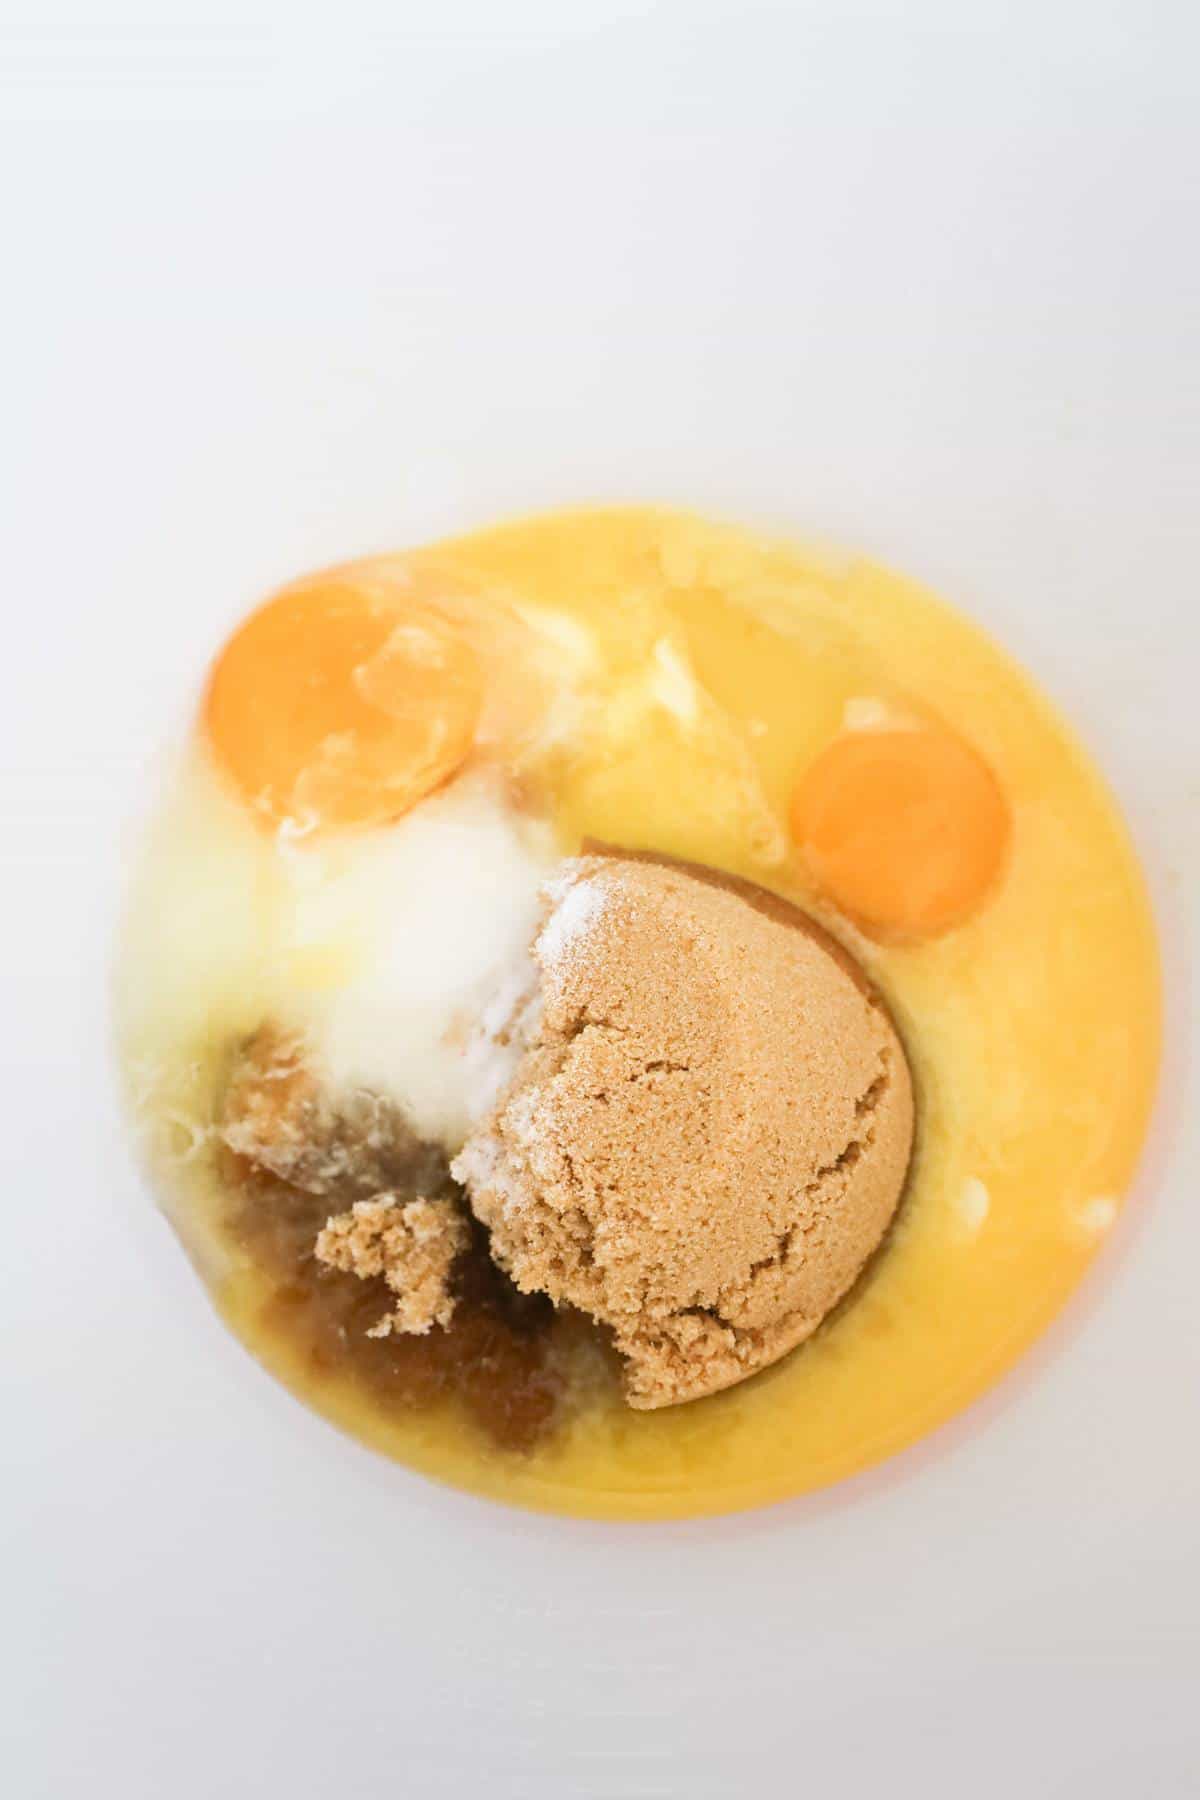 brown sugar, granulated sugar, eggs and melted butter in a mixing bowl